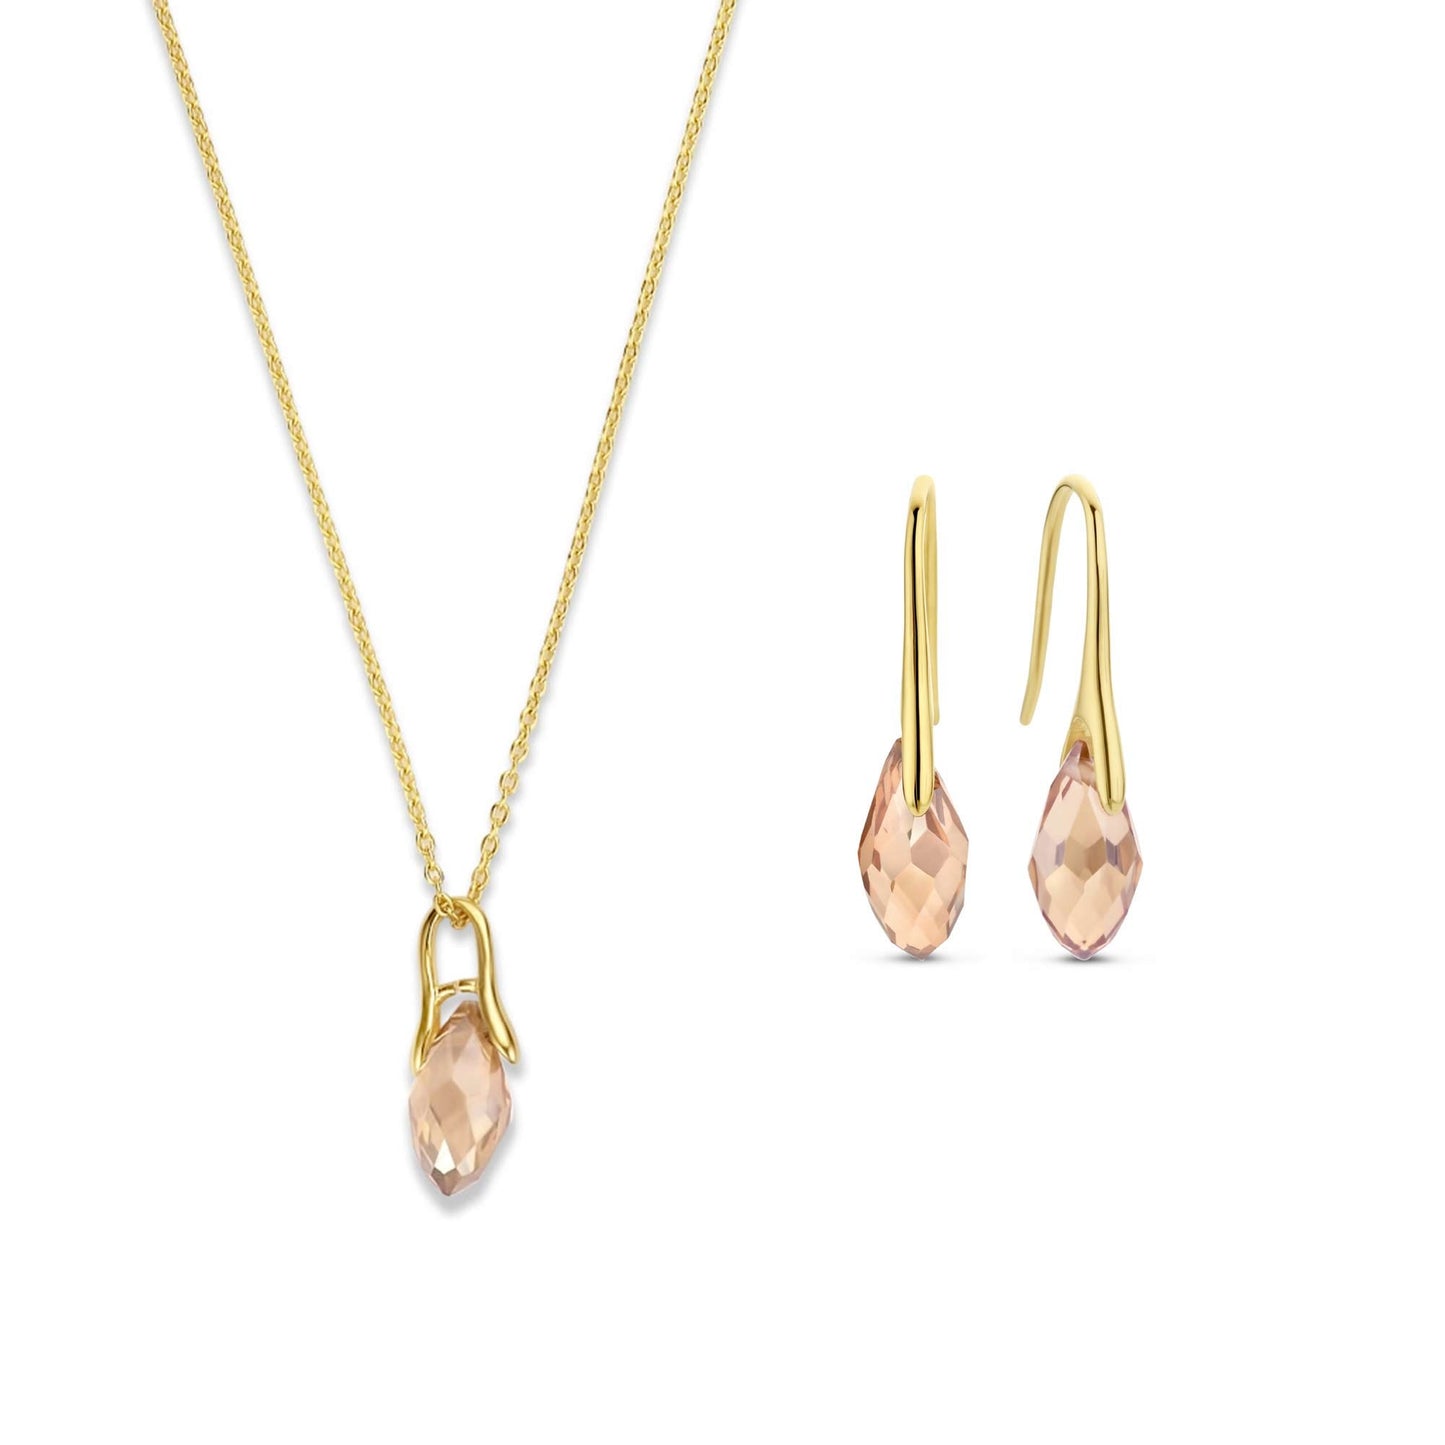 Sorprendimi 925 sterling silver gold plated necklace and drop earrings gift set with 14 karat gold plating